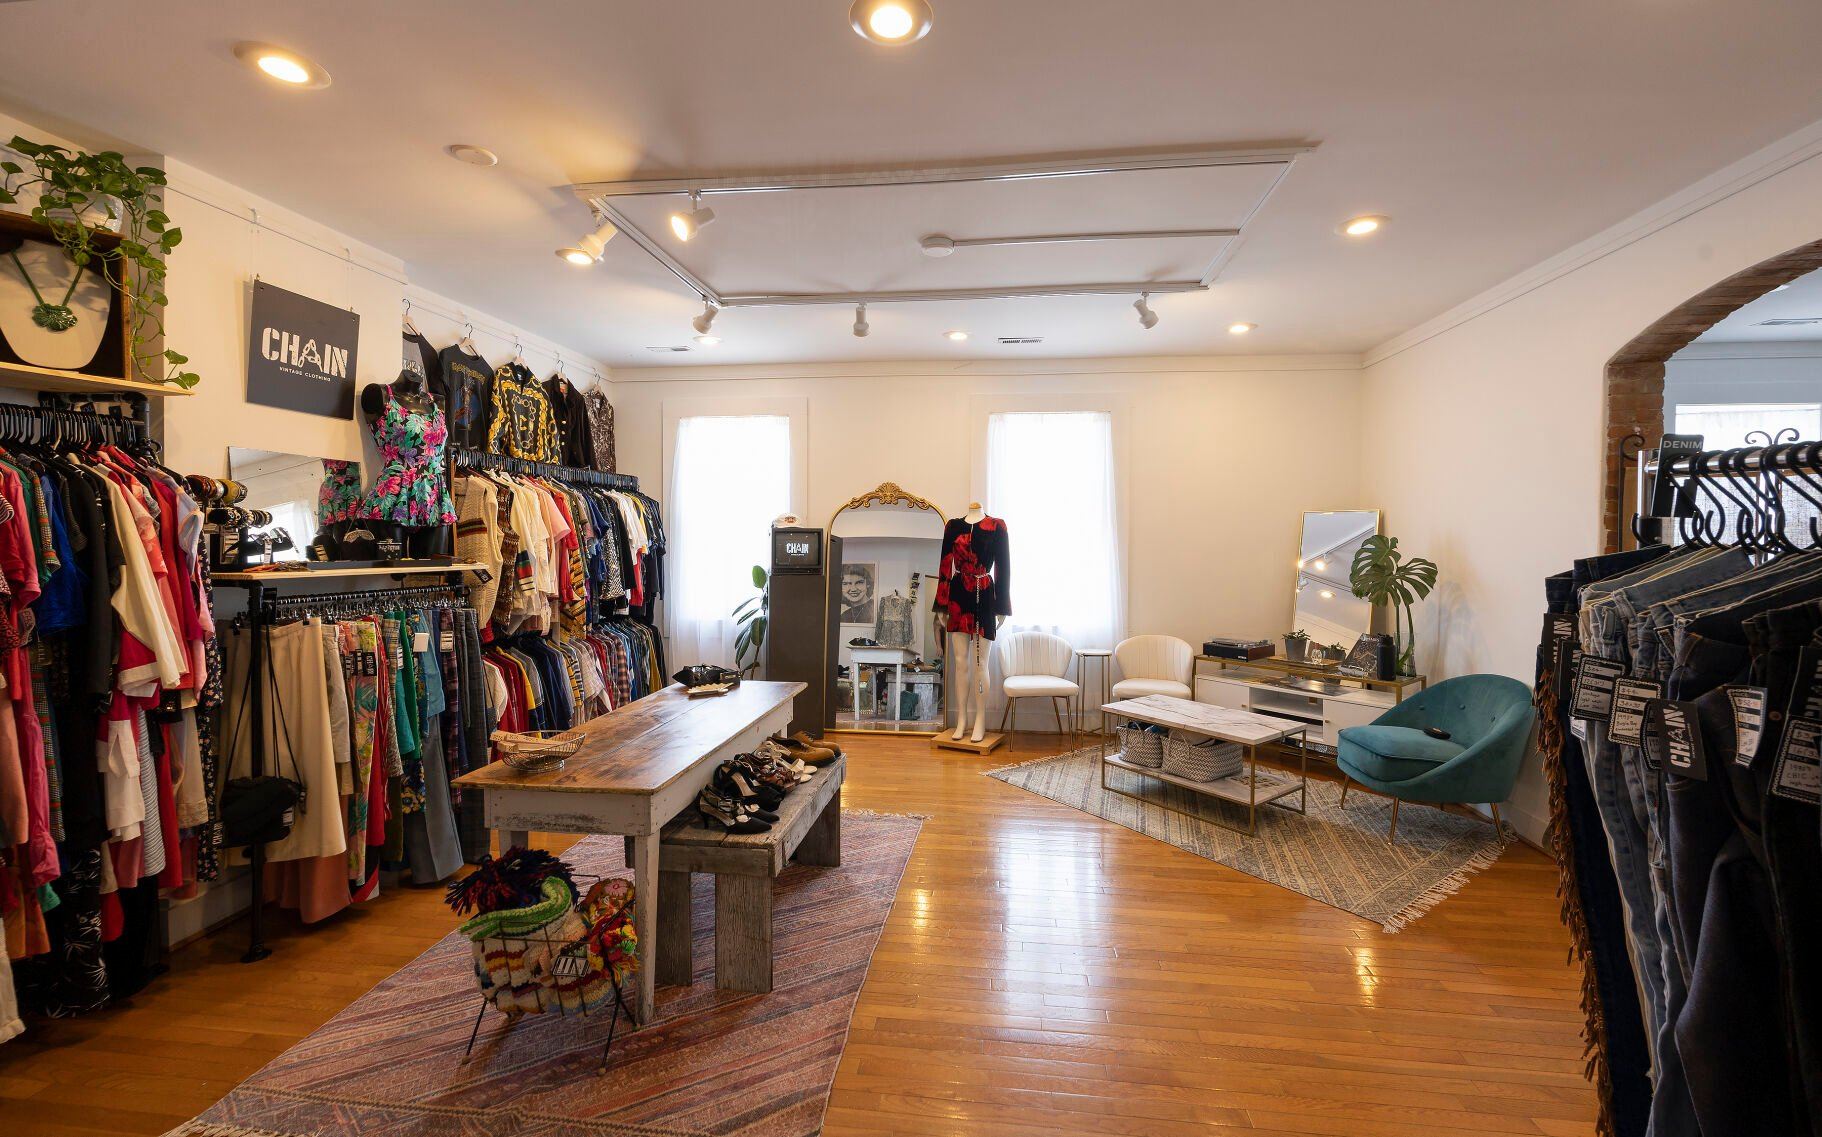 Interior of Chain Vintage Clothing on Bluff Street in Dubuque on Friday, June 23, 2023.    PHOTO CREDIT: Stephen Gassman